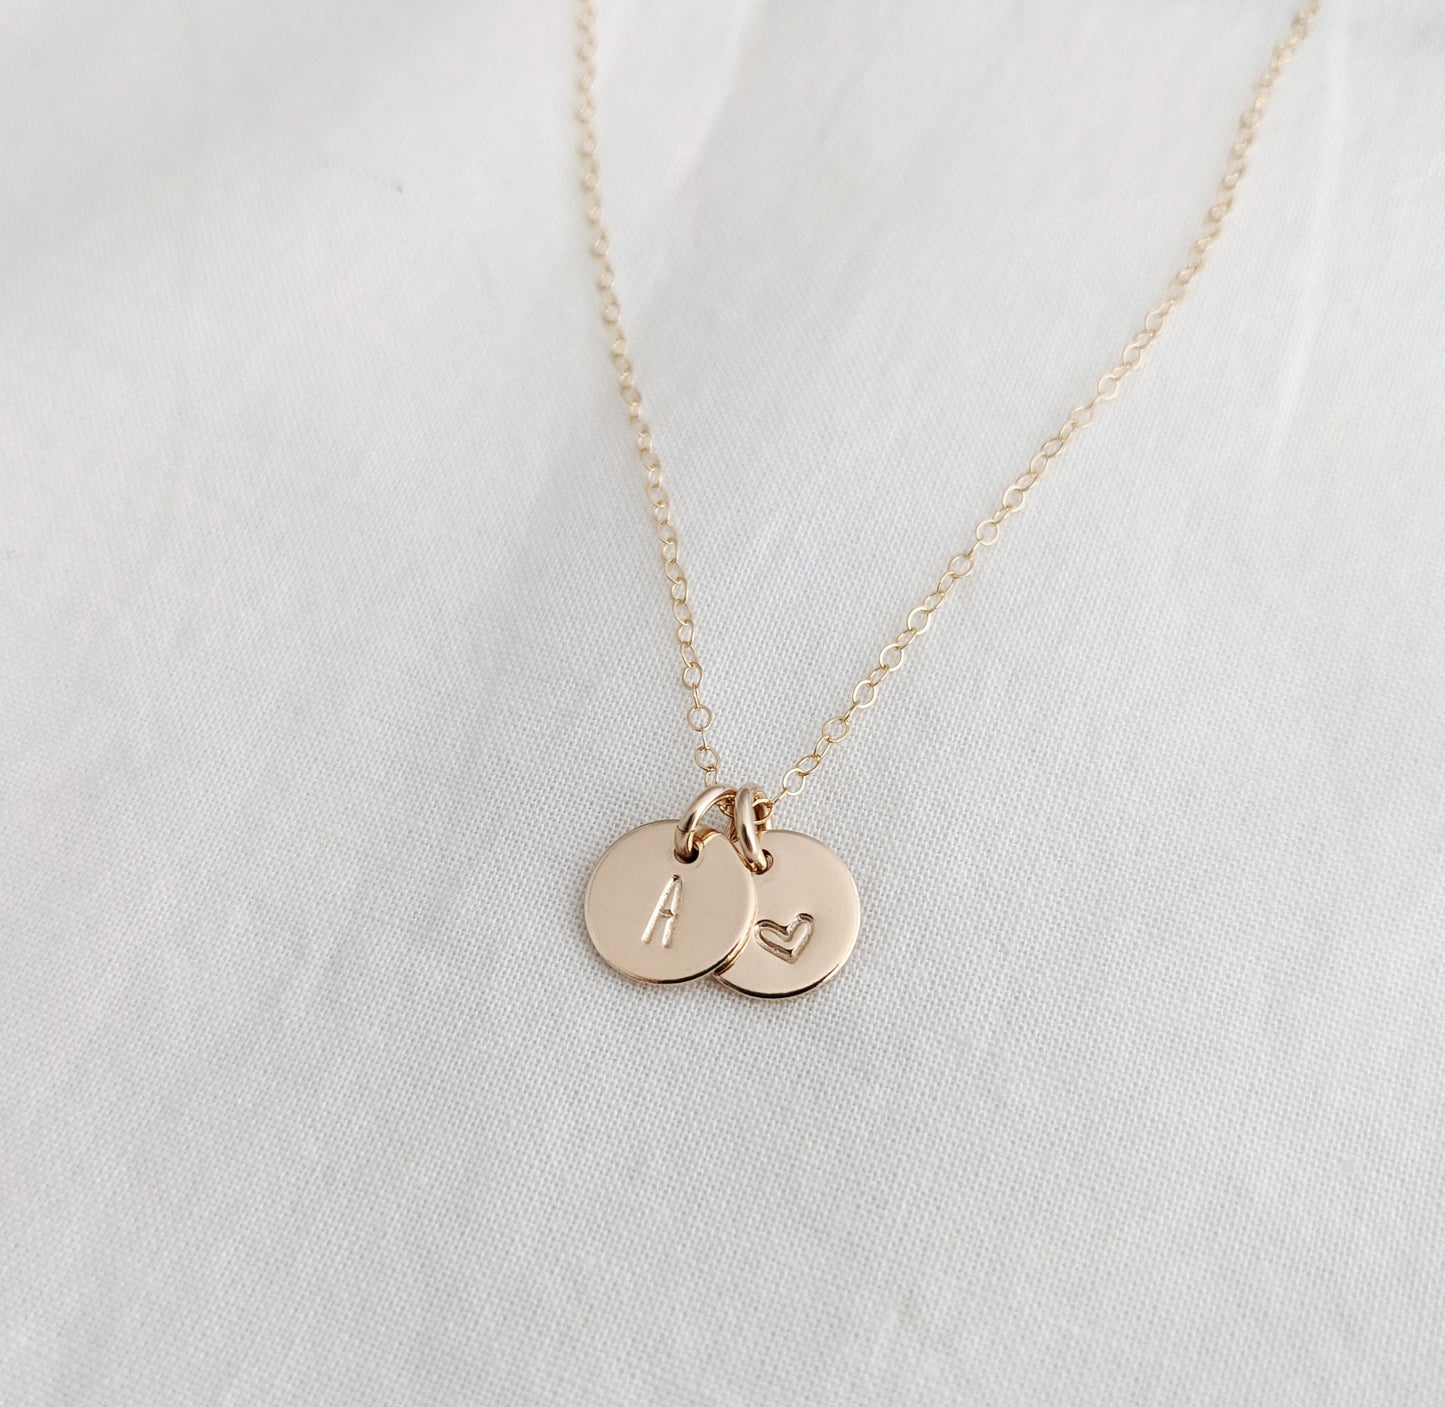 Tiny Initial Necklace with Heart | Personalized Jewelry | Initial Charm